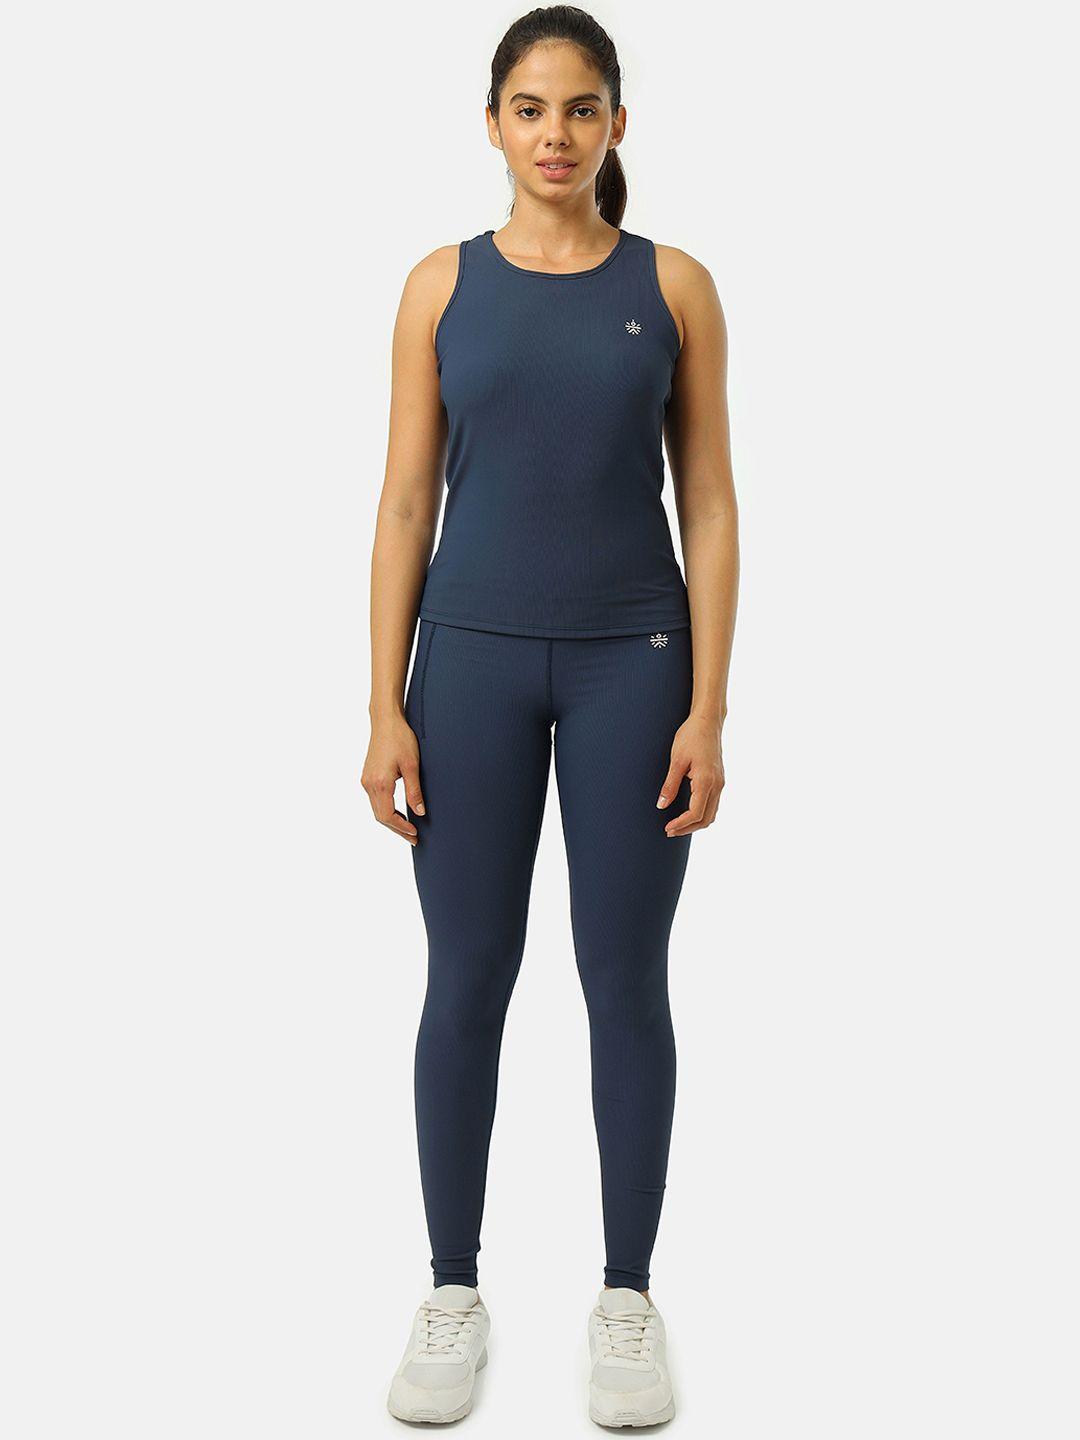 cultsport round neck sleeveless tank top with track pant